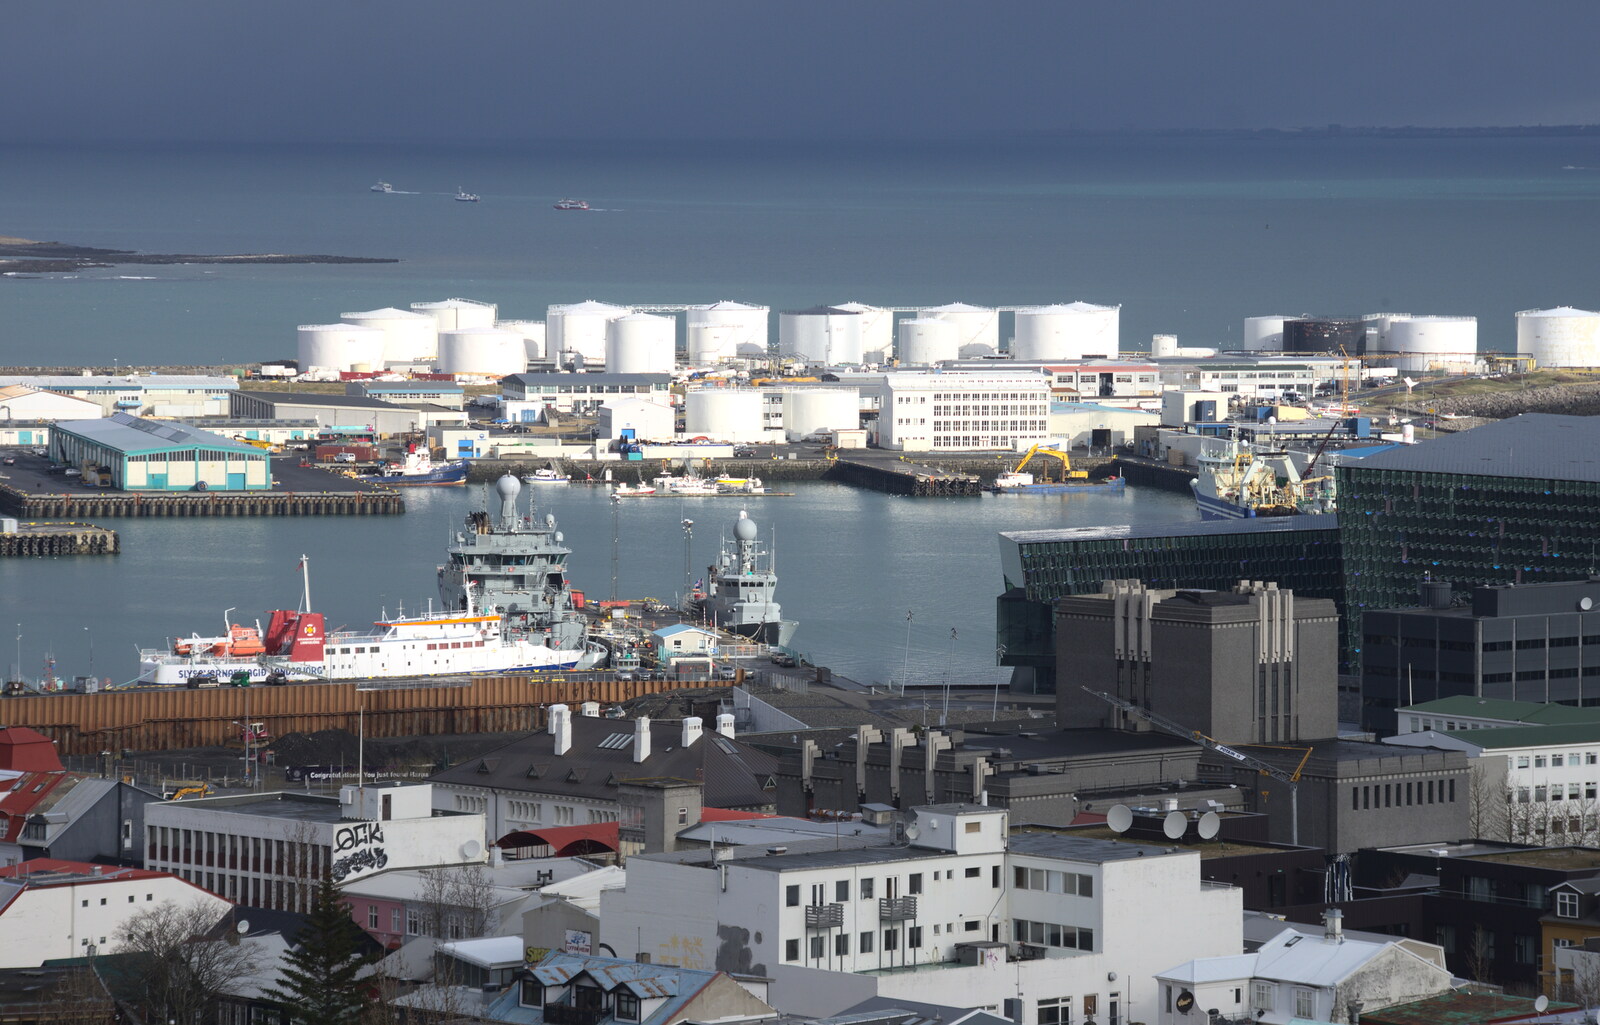 The docks from Hallgrímskirkja Cathedral and Whale Watching, Reykjavik - 21st April 2017